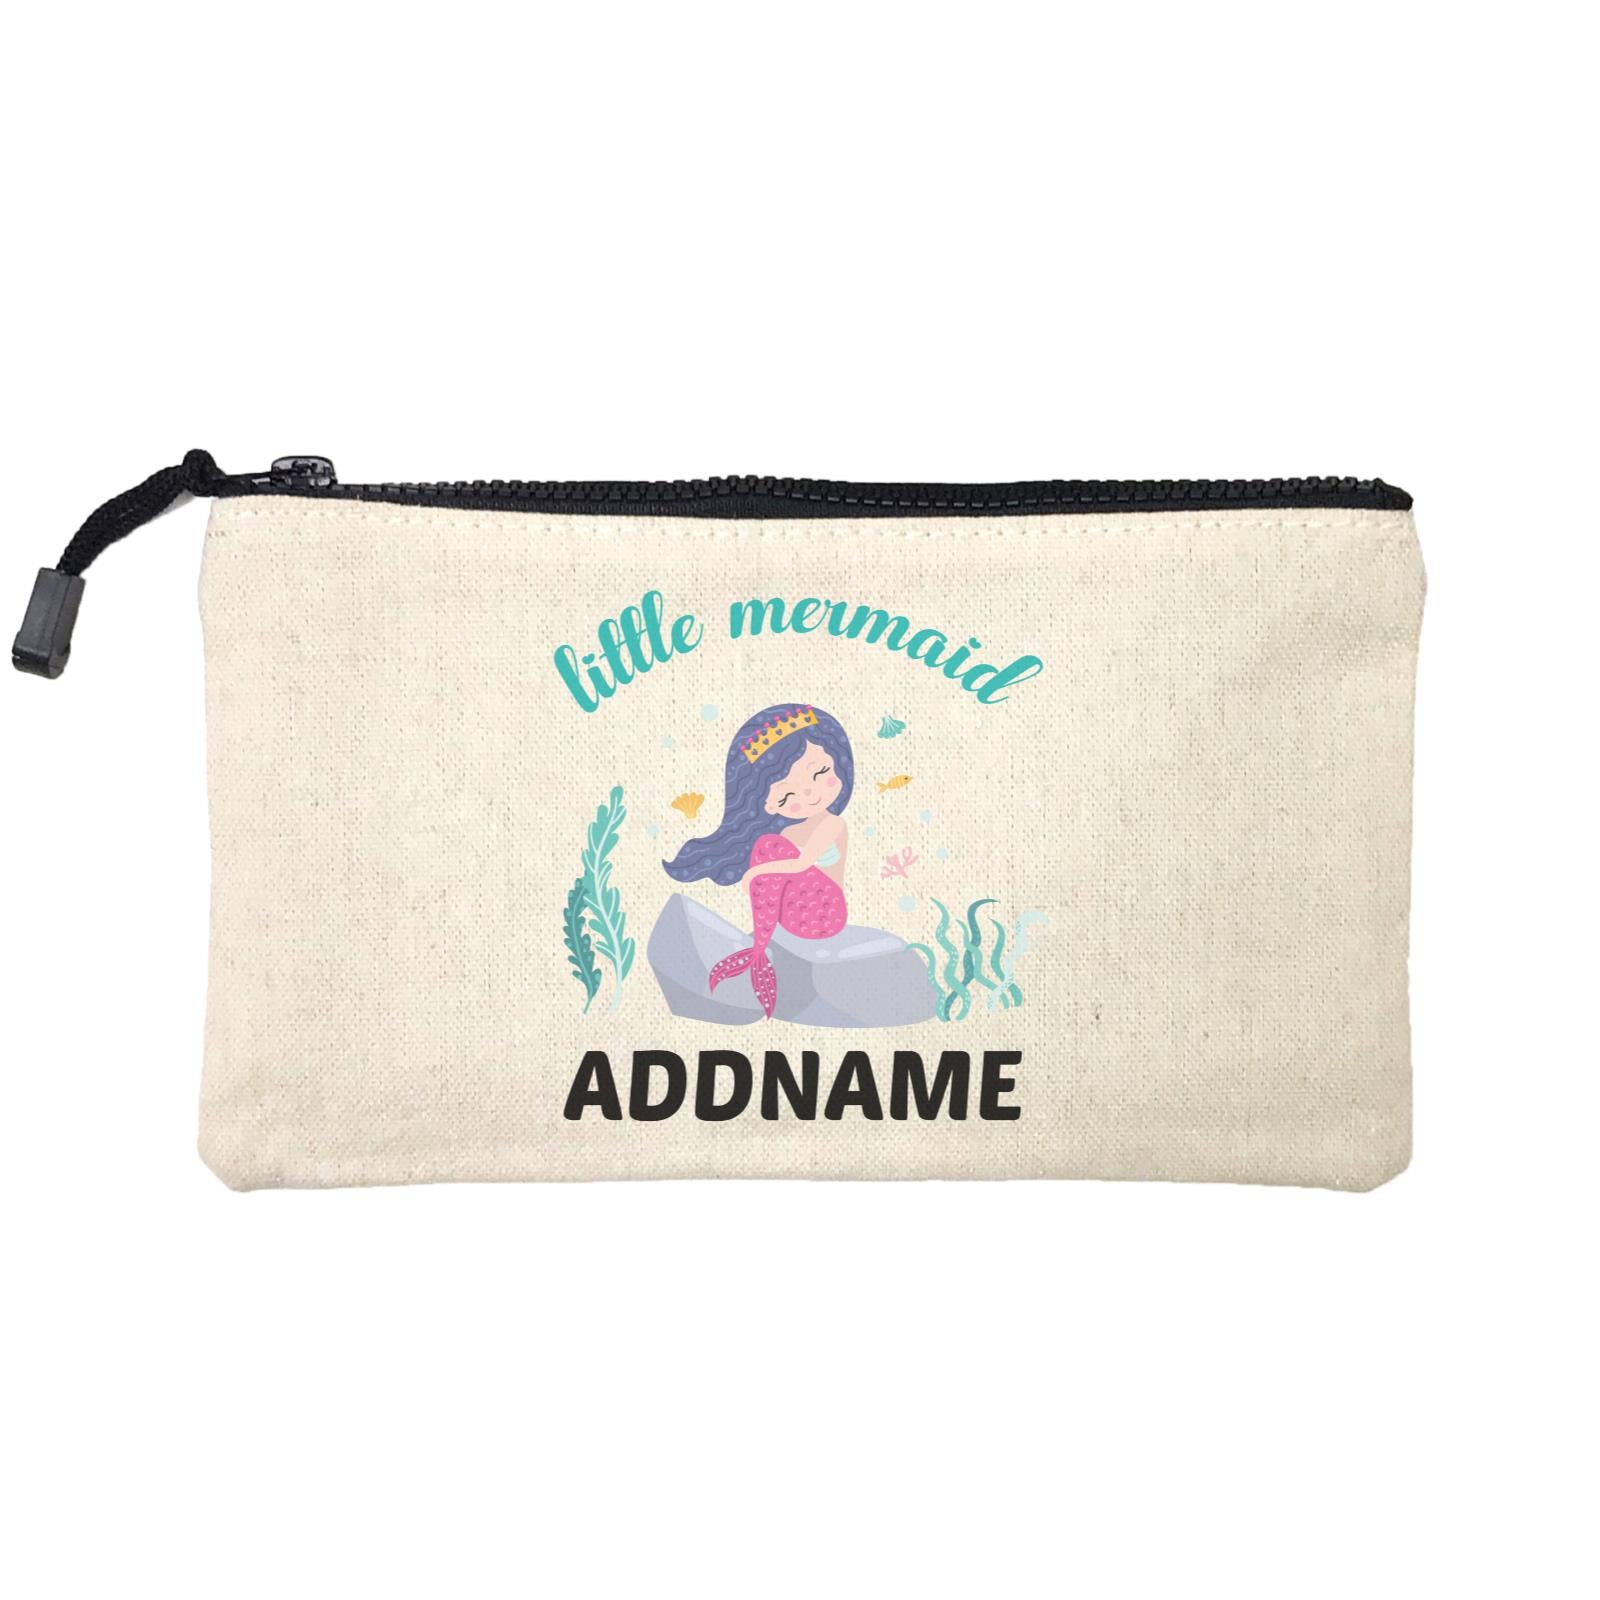 Little Mermaid Darkblue Addname Hair SP Stationery Pouch